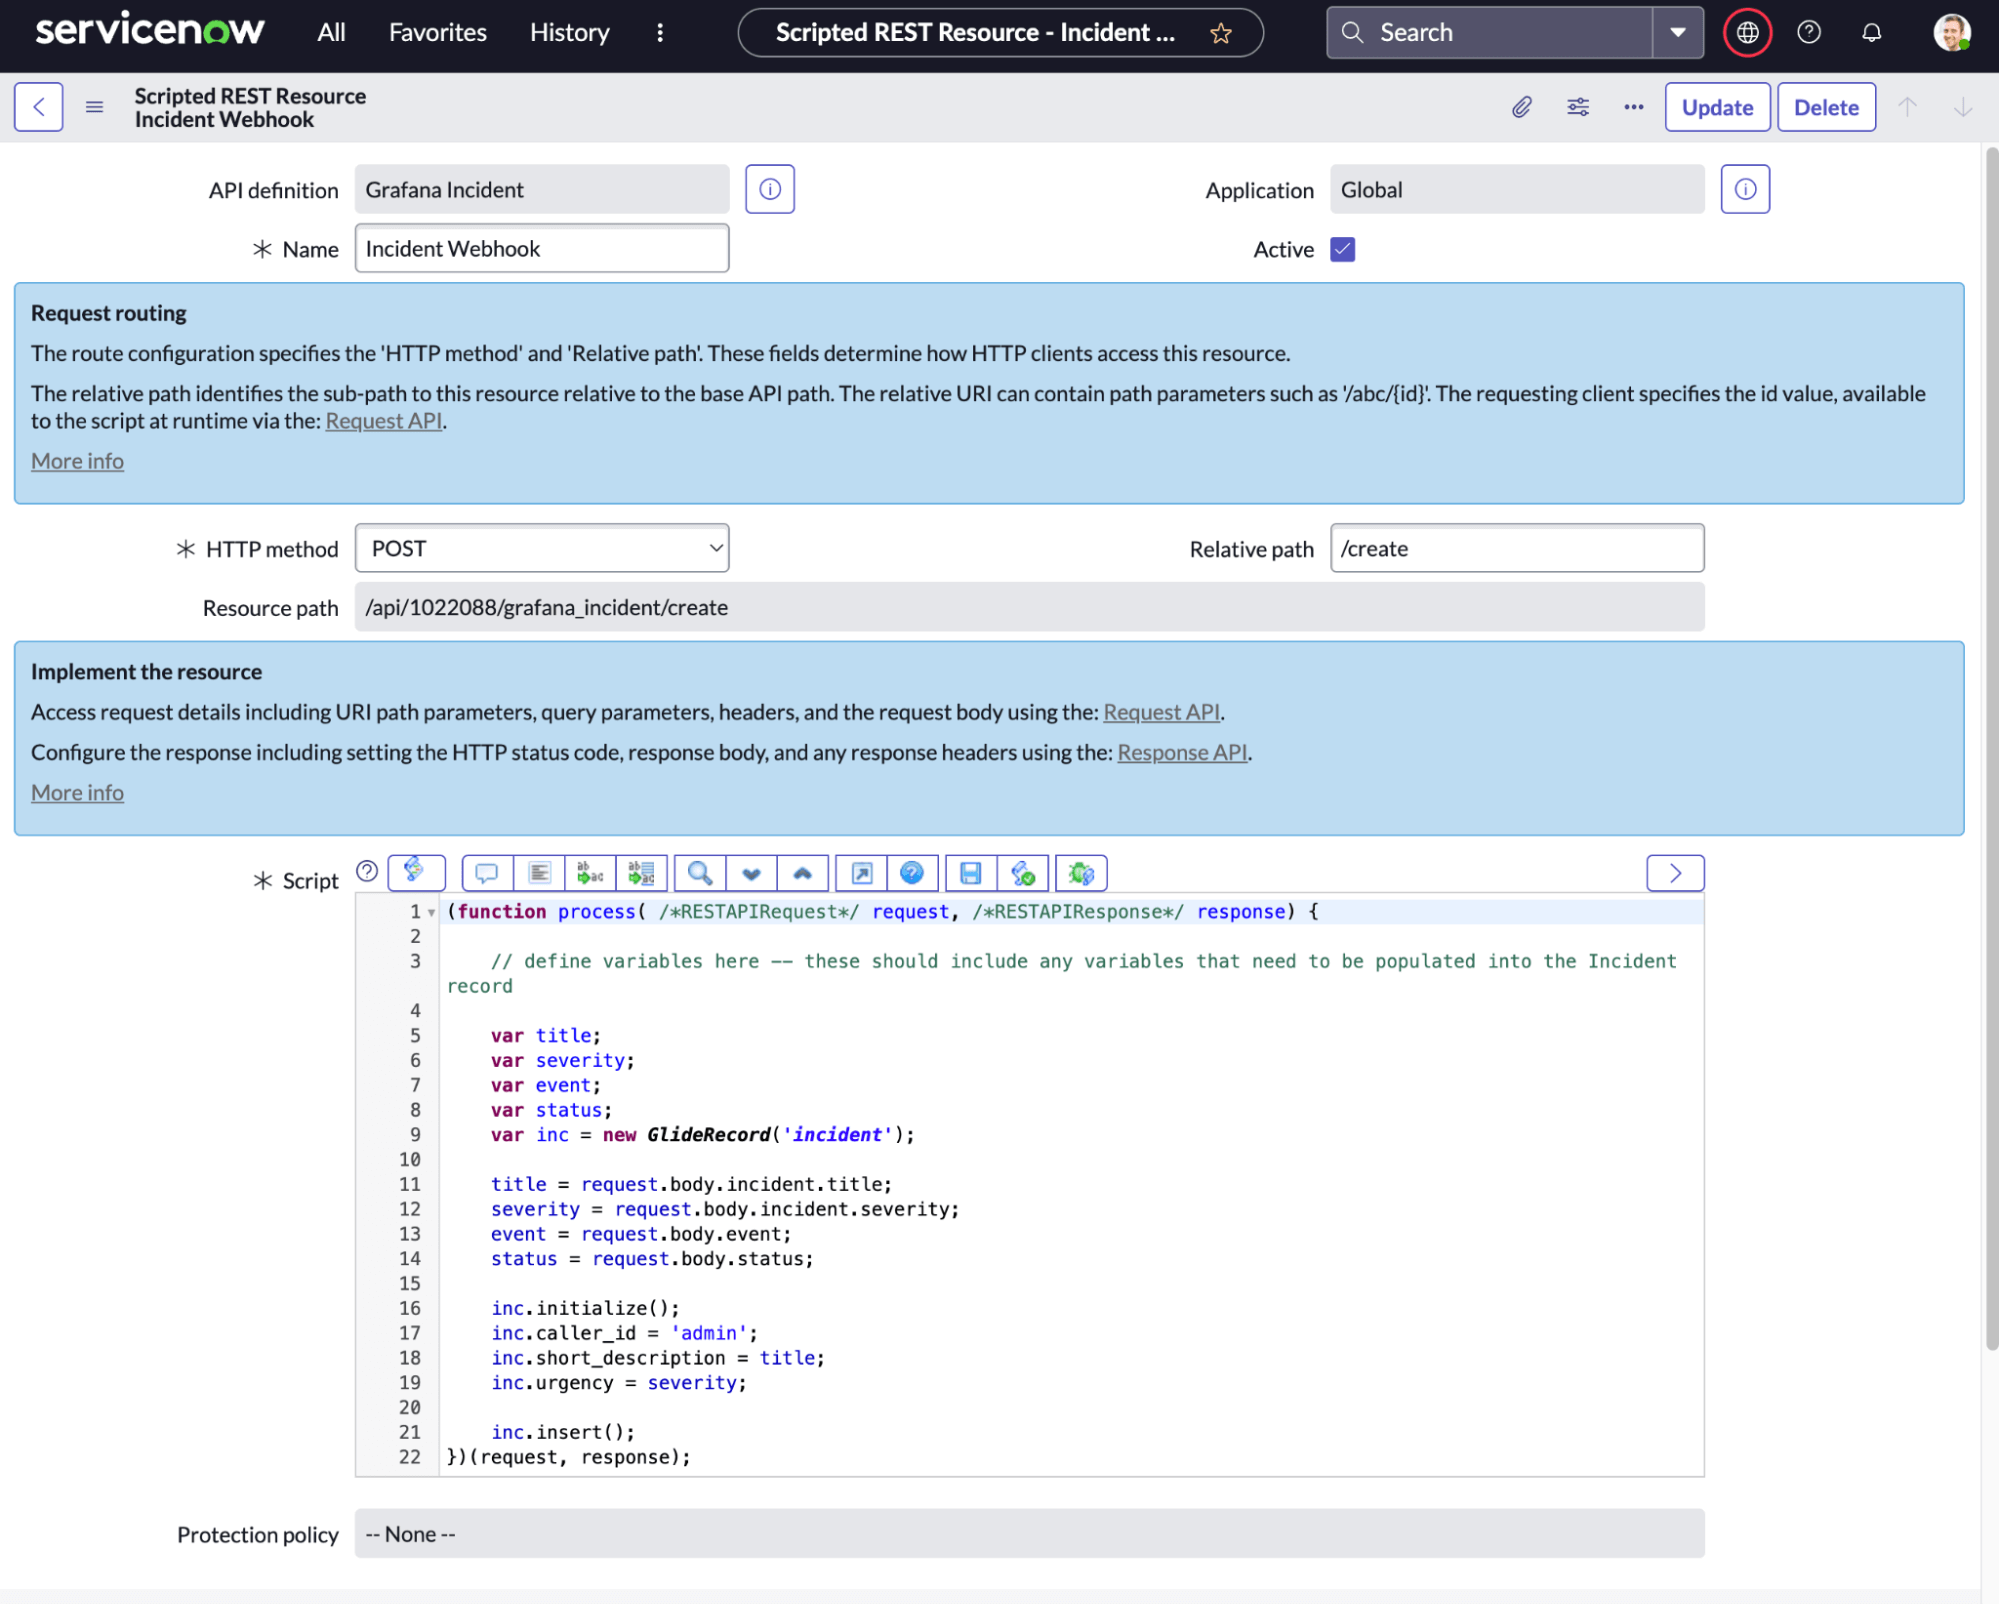 A screenshot of the new Scripted REST Resource called Incident Webhook.